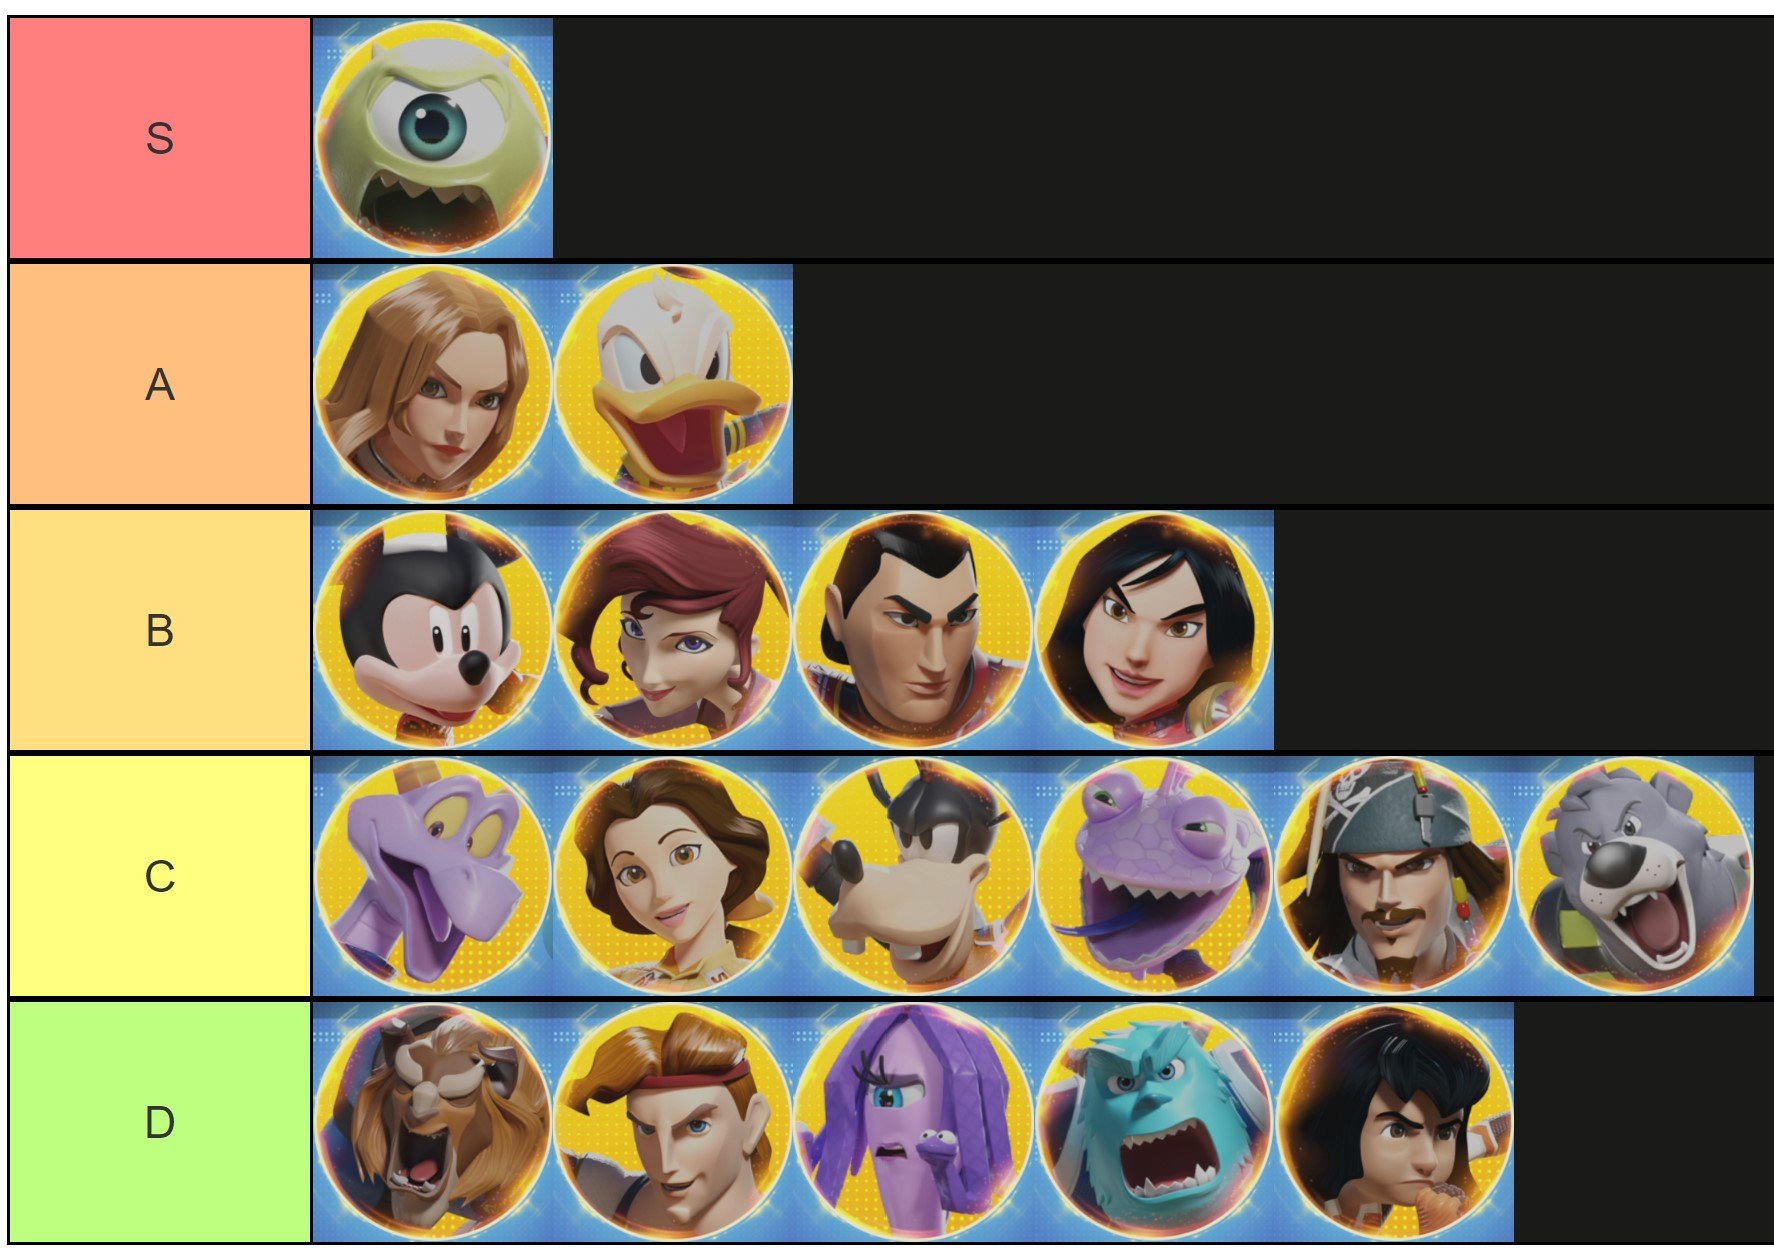 Tier List Guides: Ranking the best Characters in 2023